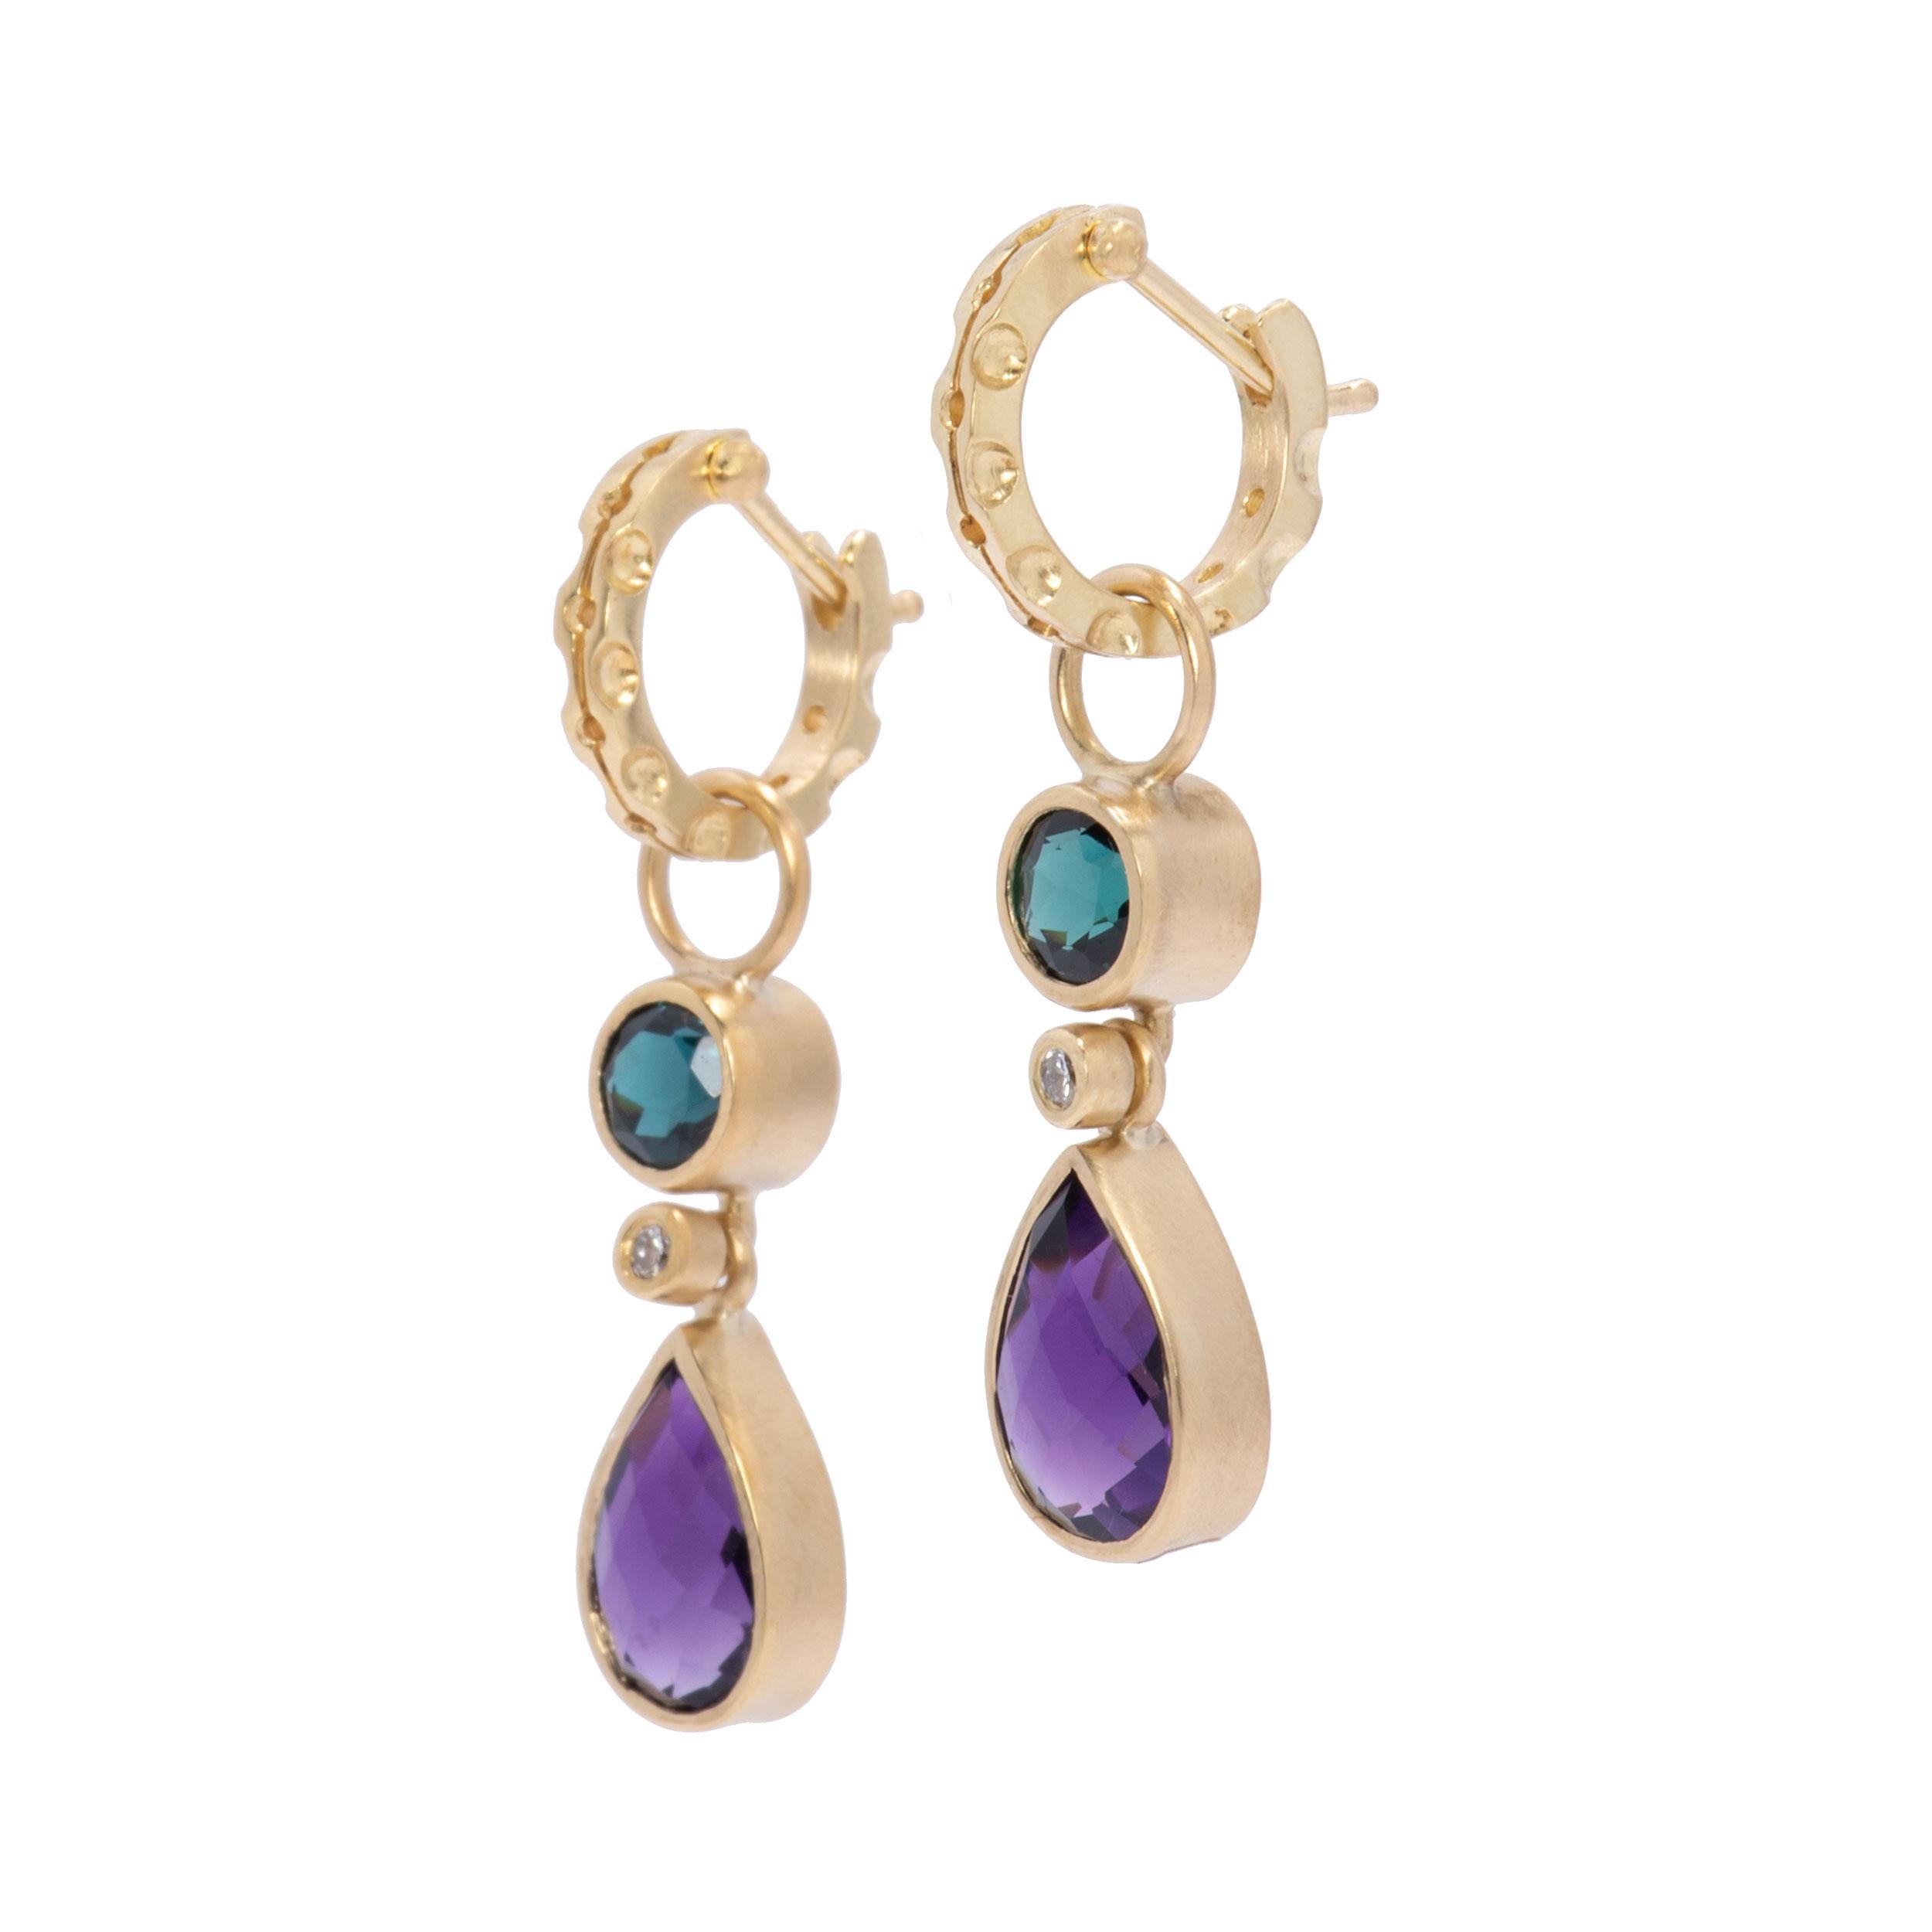 Round indicolite tourmalines 1.76cts dance above amethyst teardrops 4.74cts in pops of vibrant color. A flash of round bright white diamonds .10cts center stage ramp up the sparkle and all are set in our signature satin finished 18k gold. Suspended